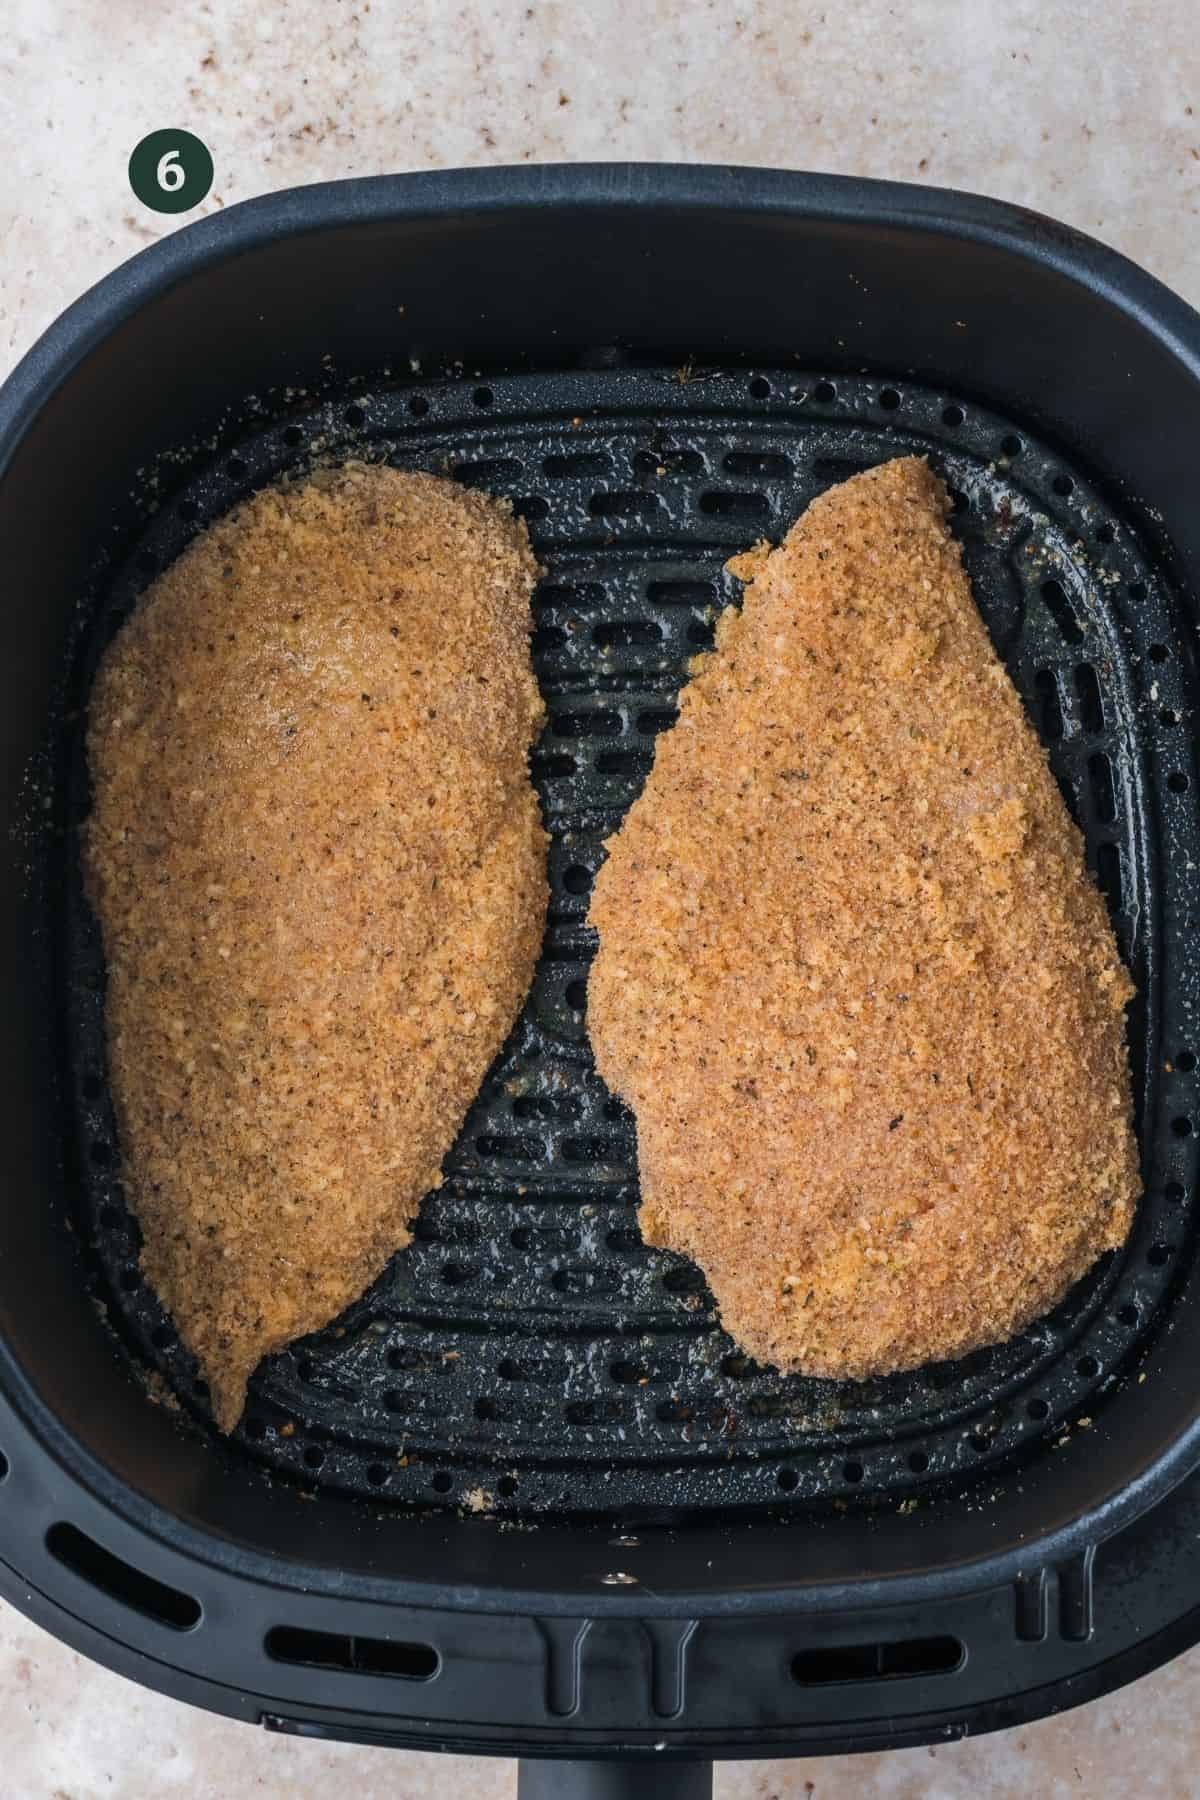 Fully coated chicken breast in the air fryer basket to cook.